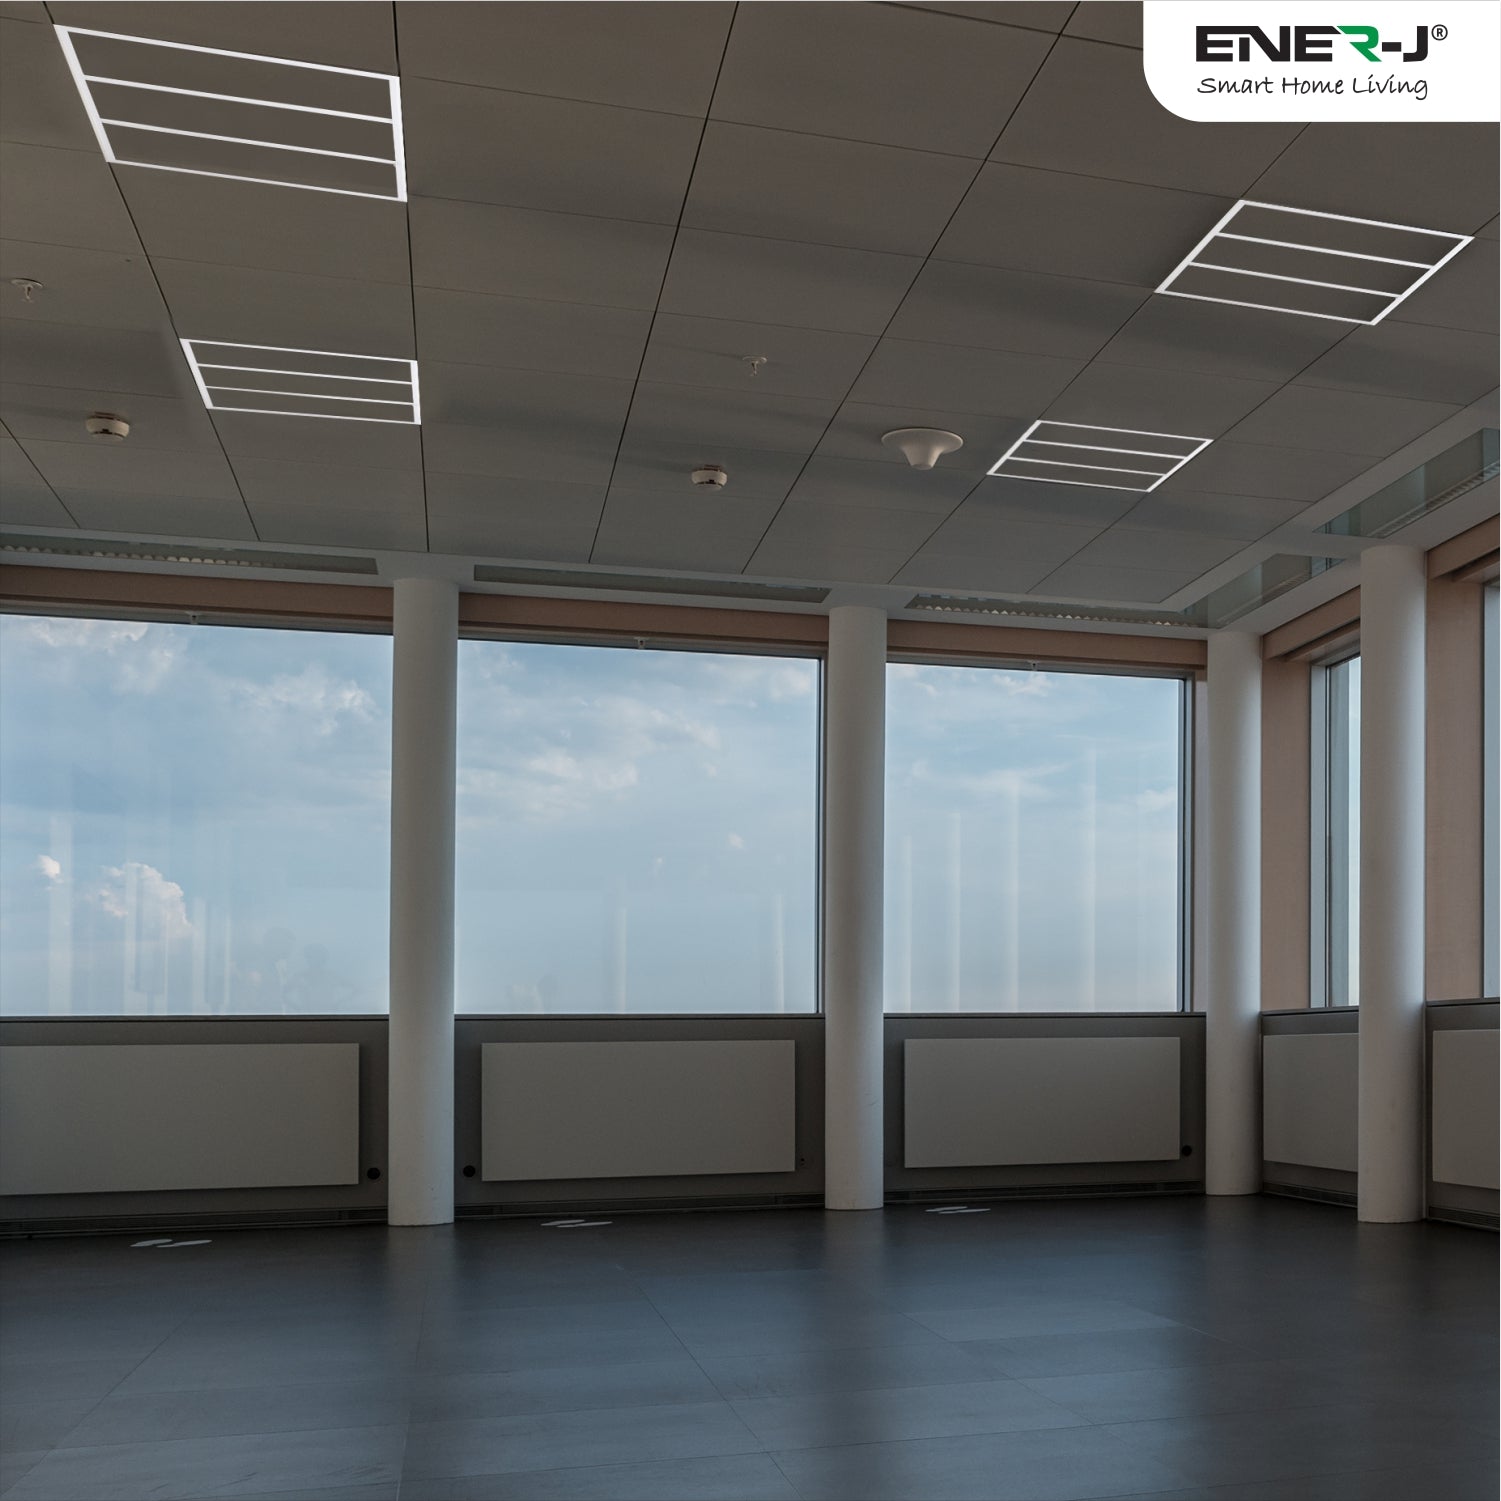 Edgelit Borderline LED Panel with Middle Bars 40W 4000 Lumens, 2 Years Warranty, 6000K for Offices, Schools, Hotels, Restaurants